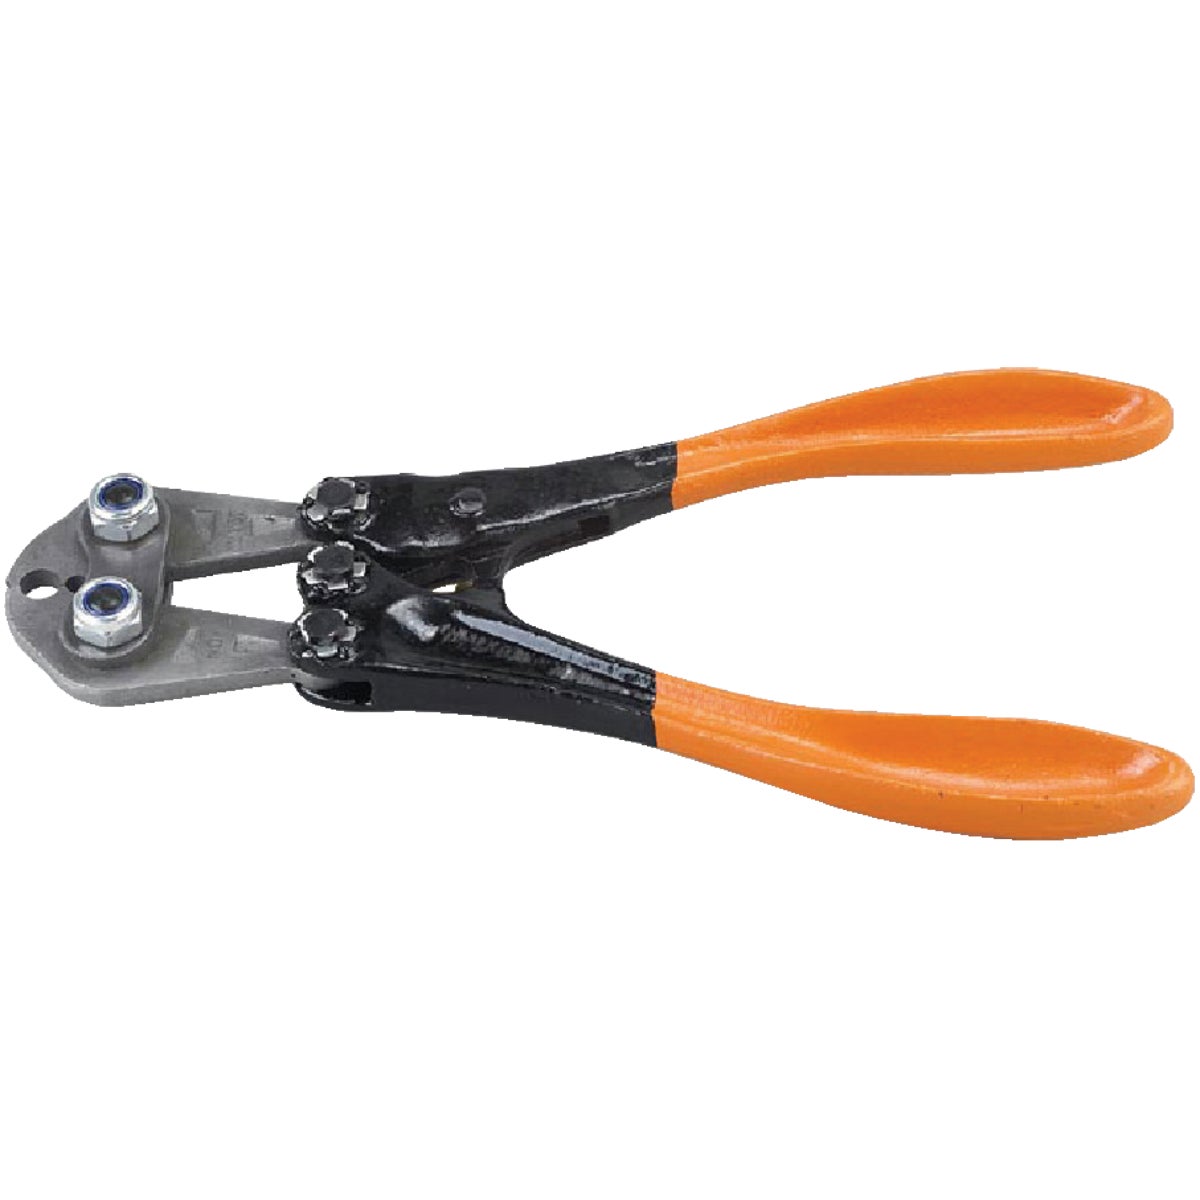 Item 708489, 2-slot fence splicing tool. Ideal for quick, trouble-free splices.